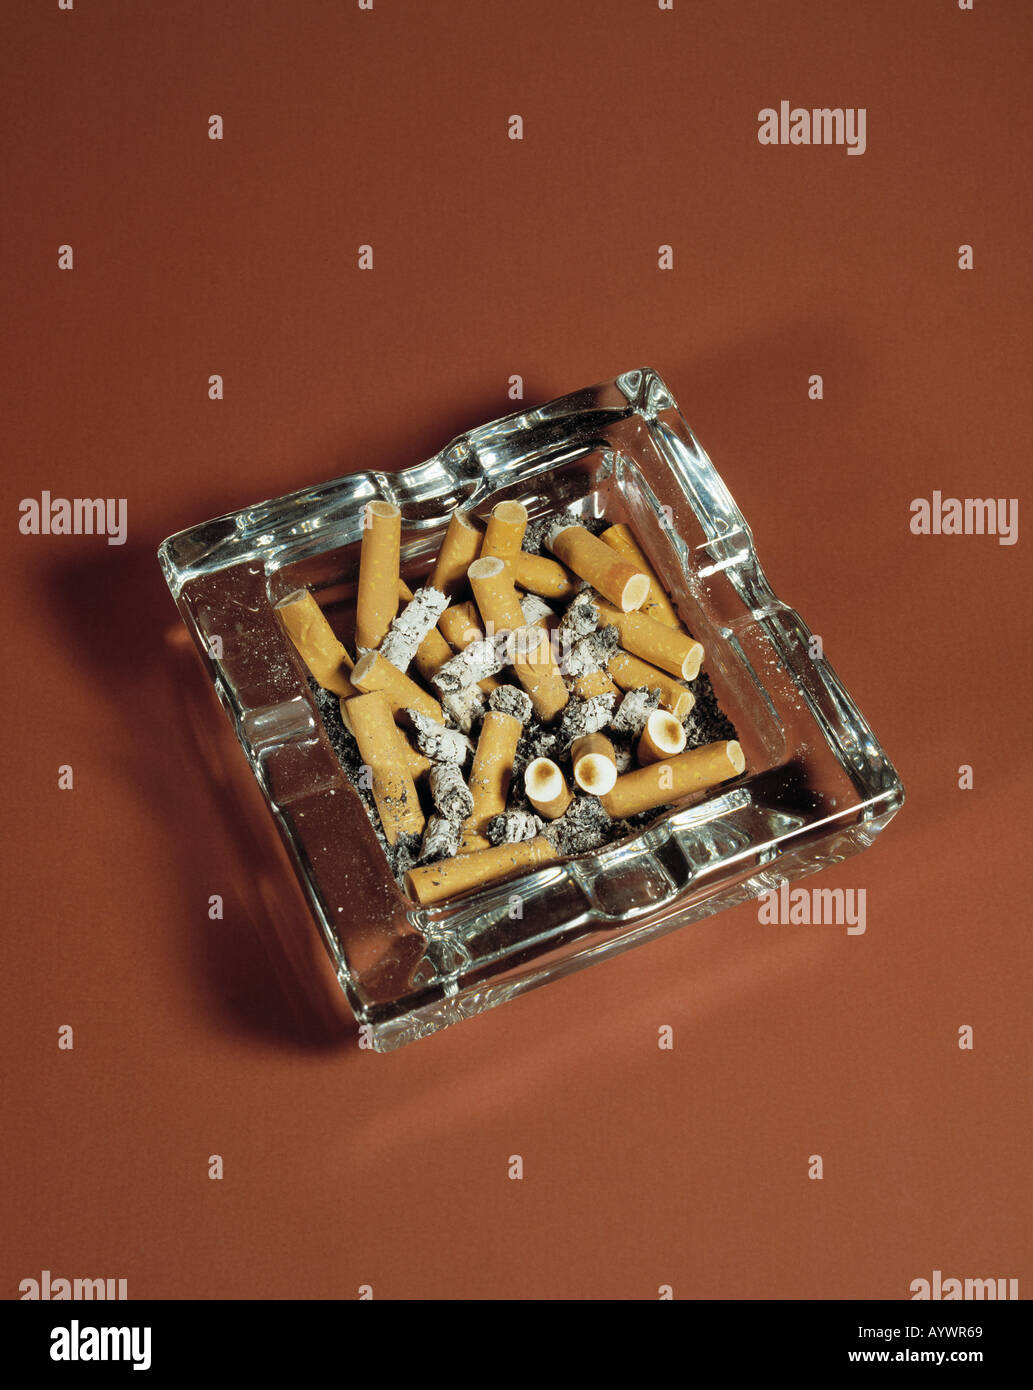 health, full ashtray, overcrowded, cigarette ends, butts, stubs, smoking, cigarette ashes Stock Photo